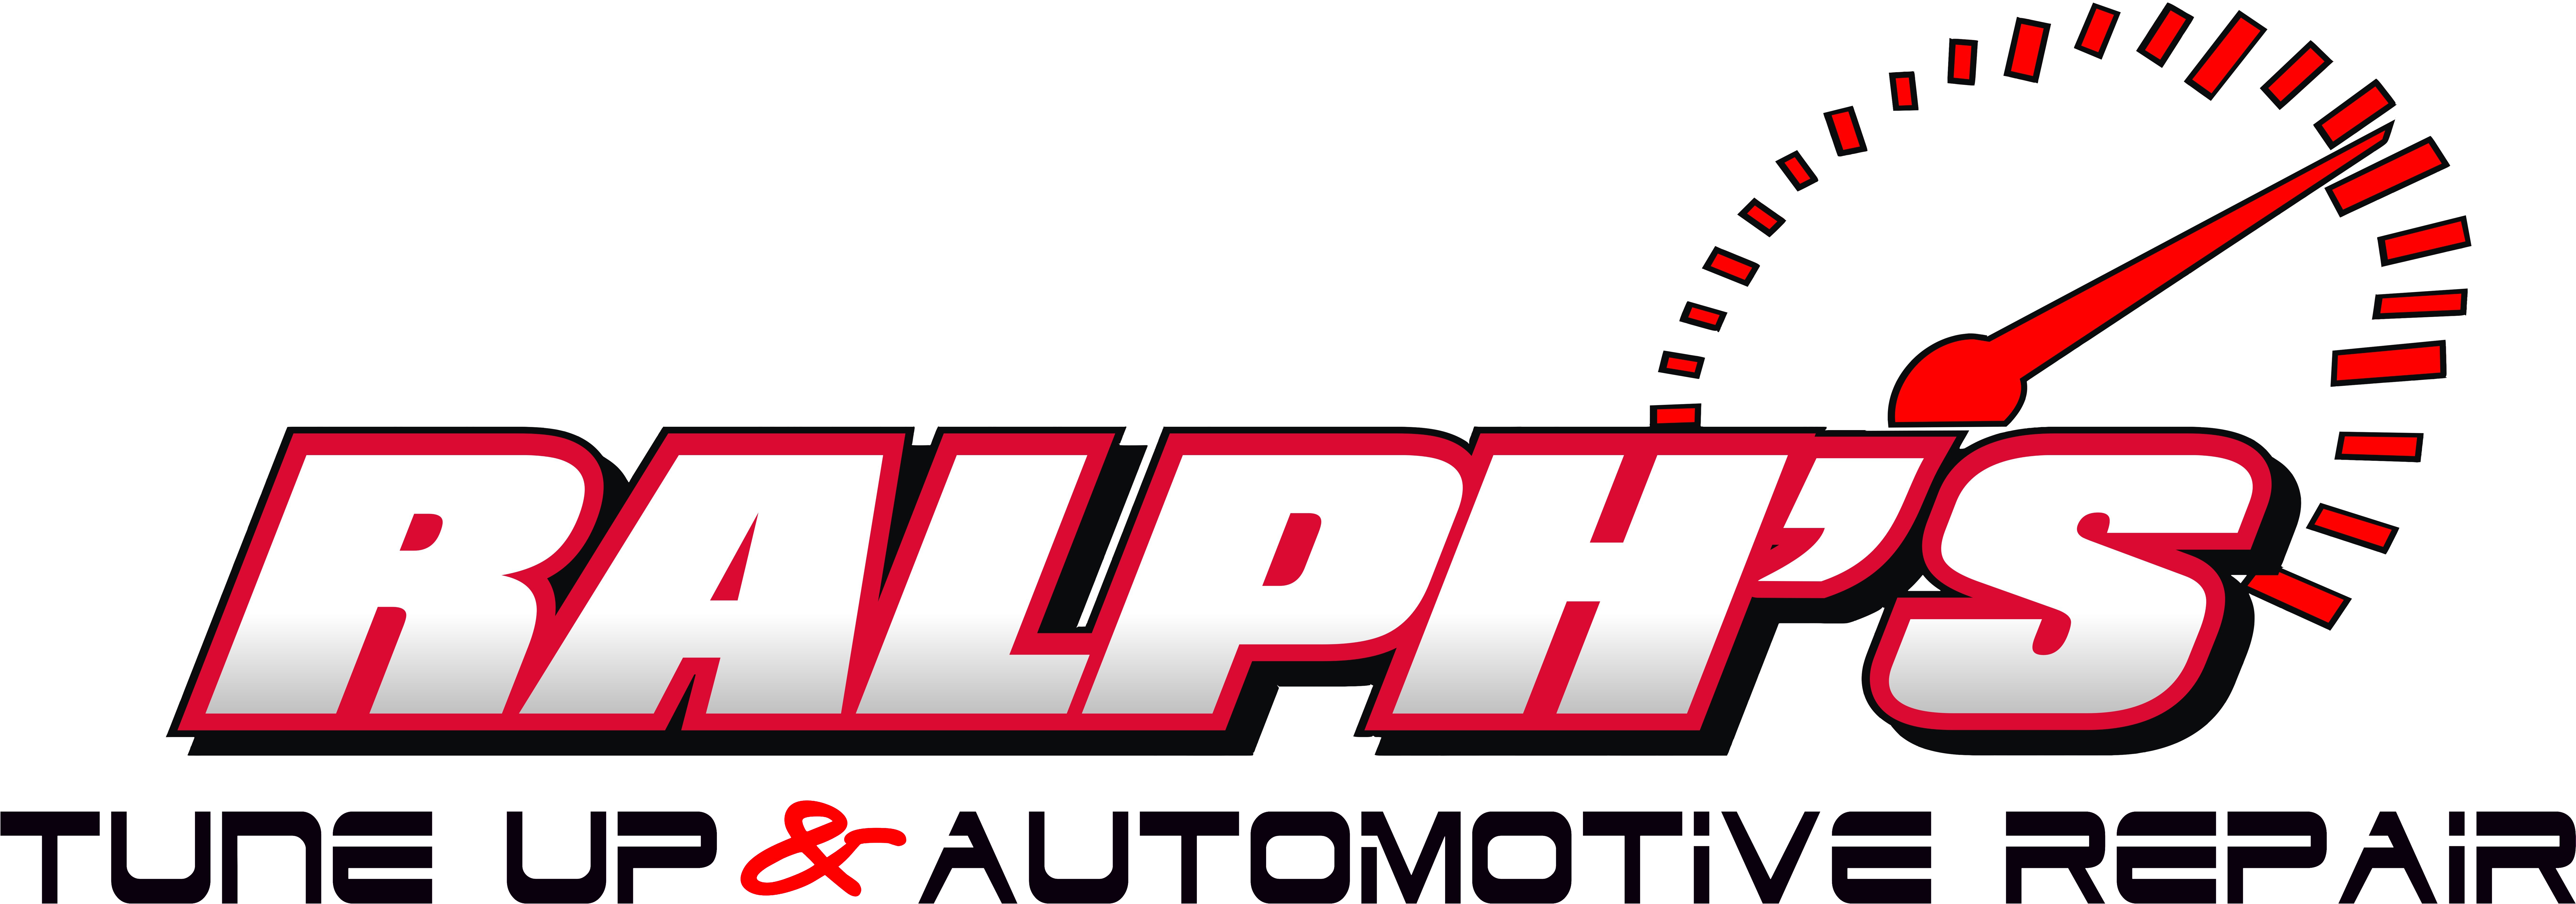 Ralphs Tune Up and Automotive